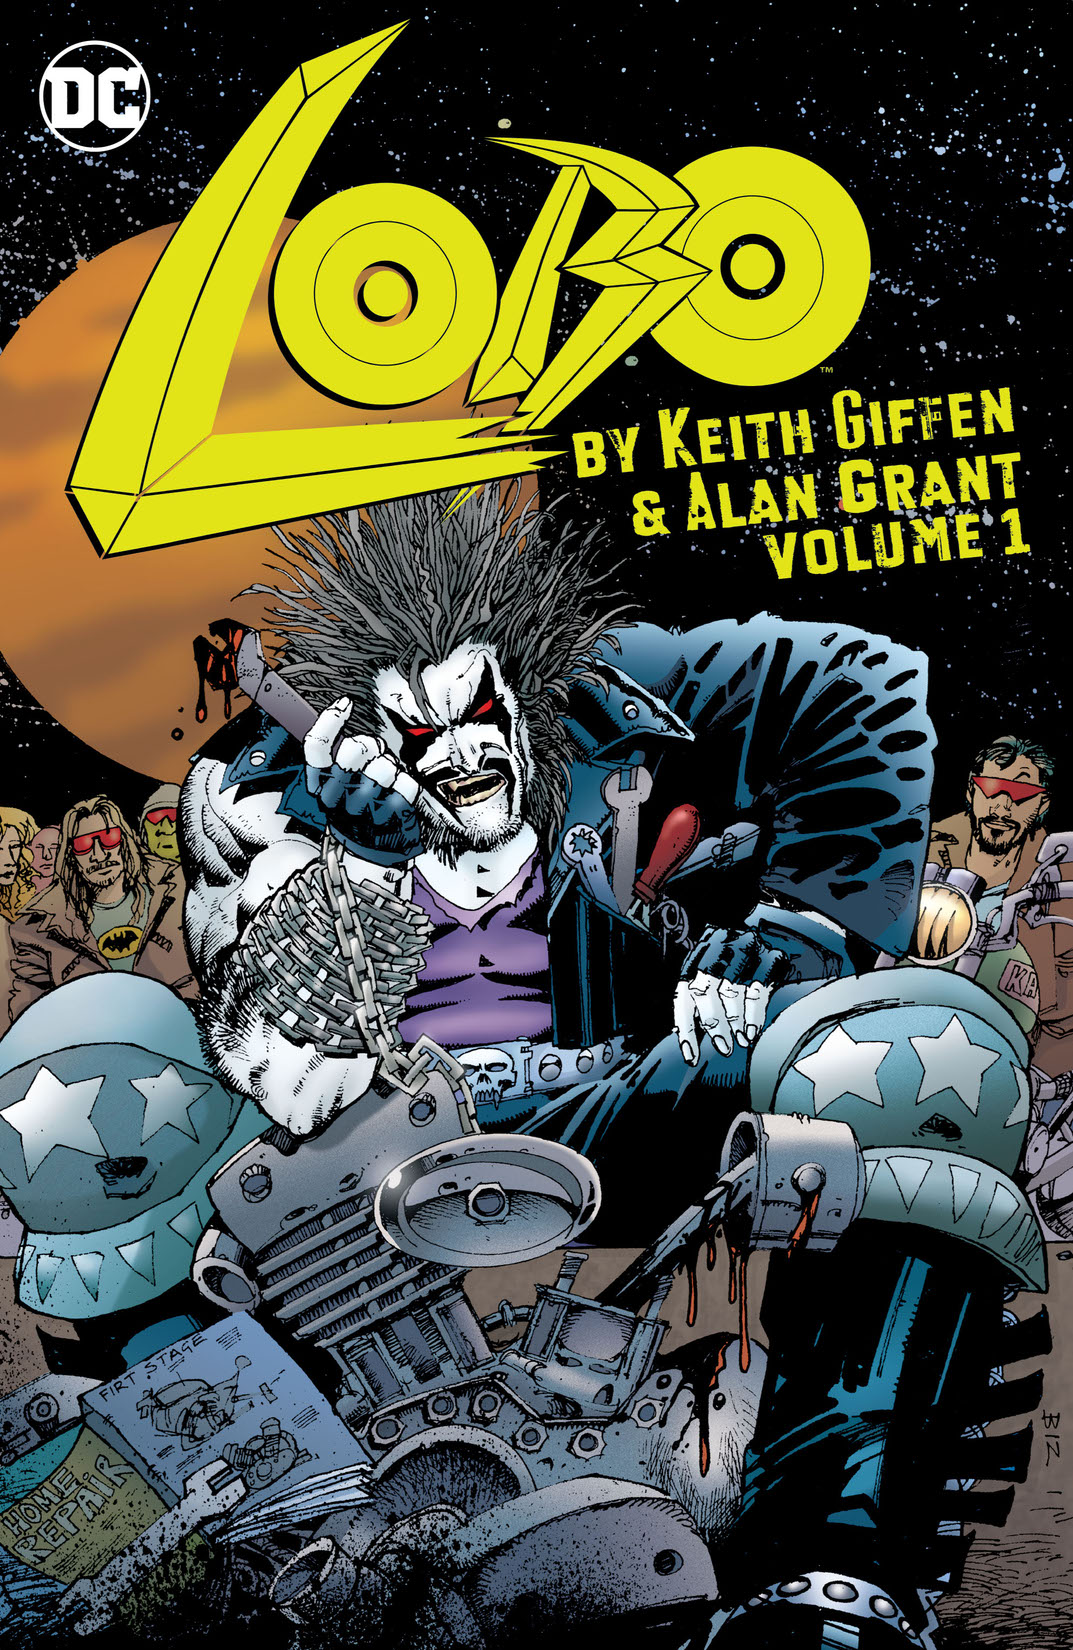 Lobo by Keith Giffen & Alan Grant Vol. 1 preview images